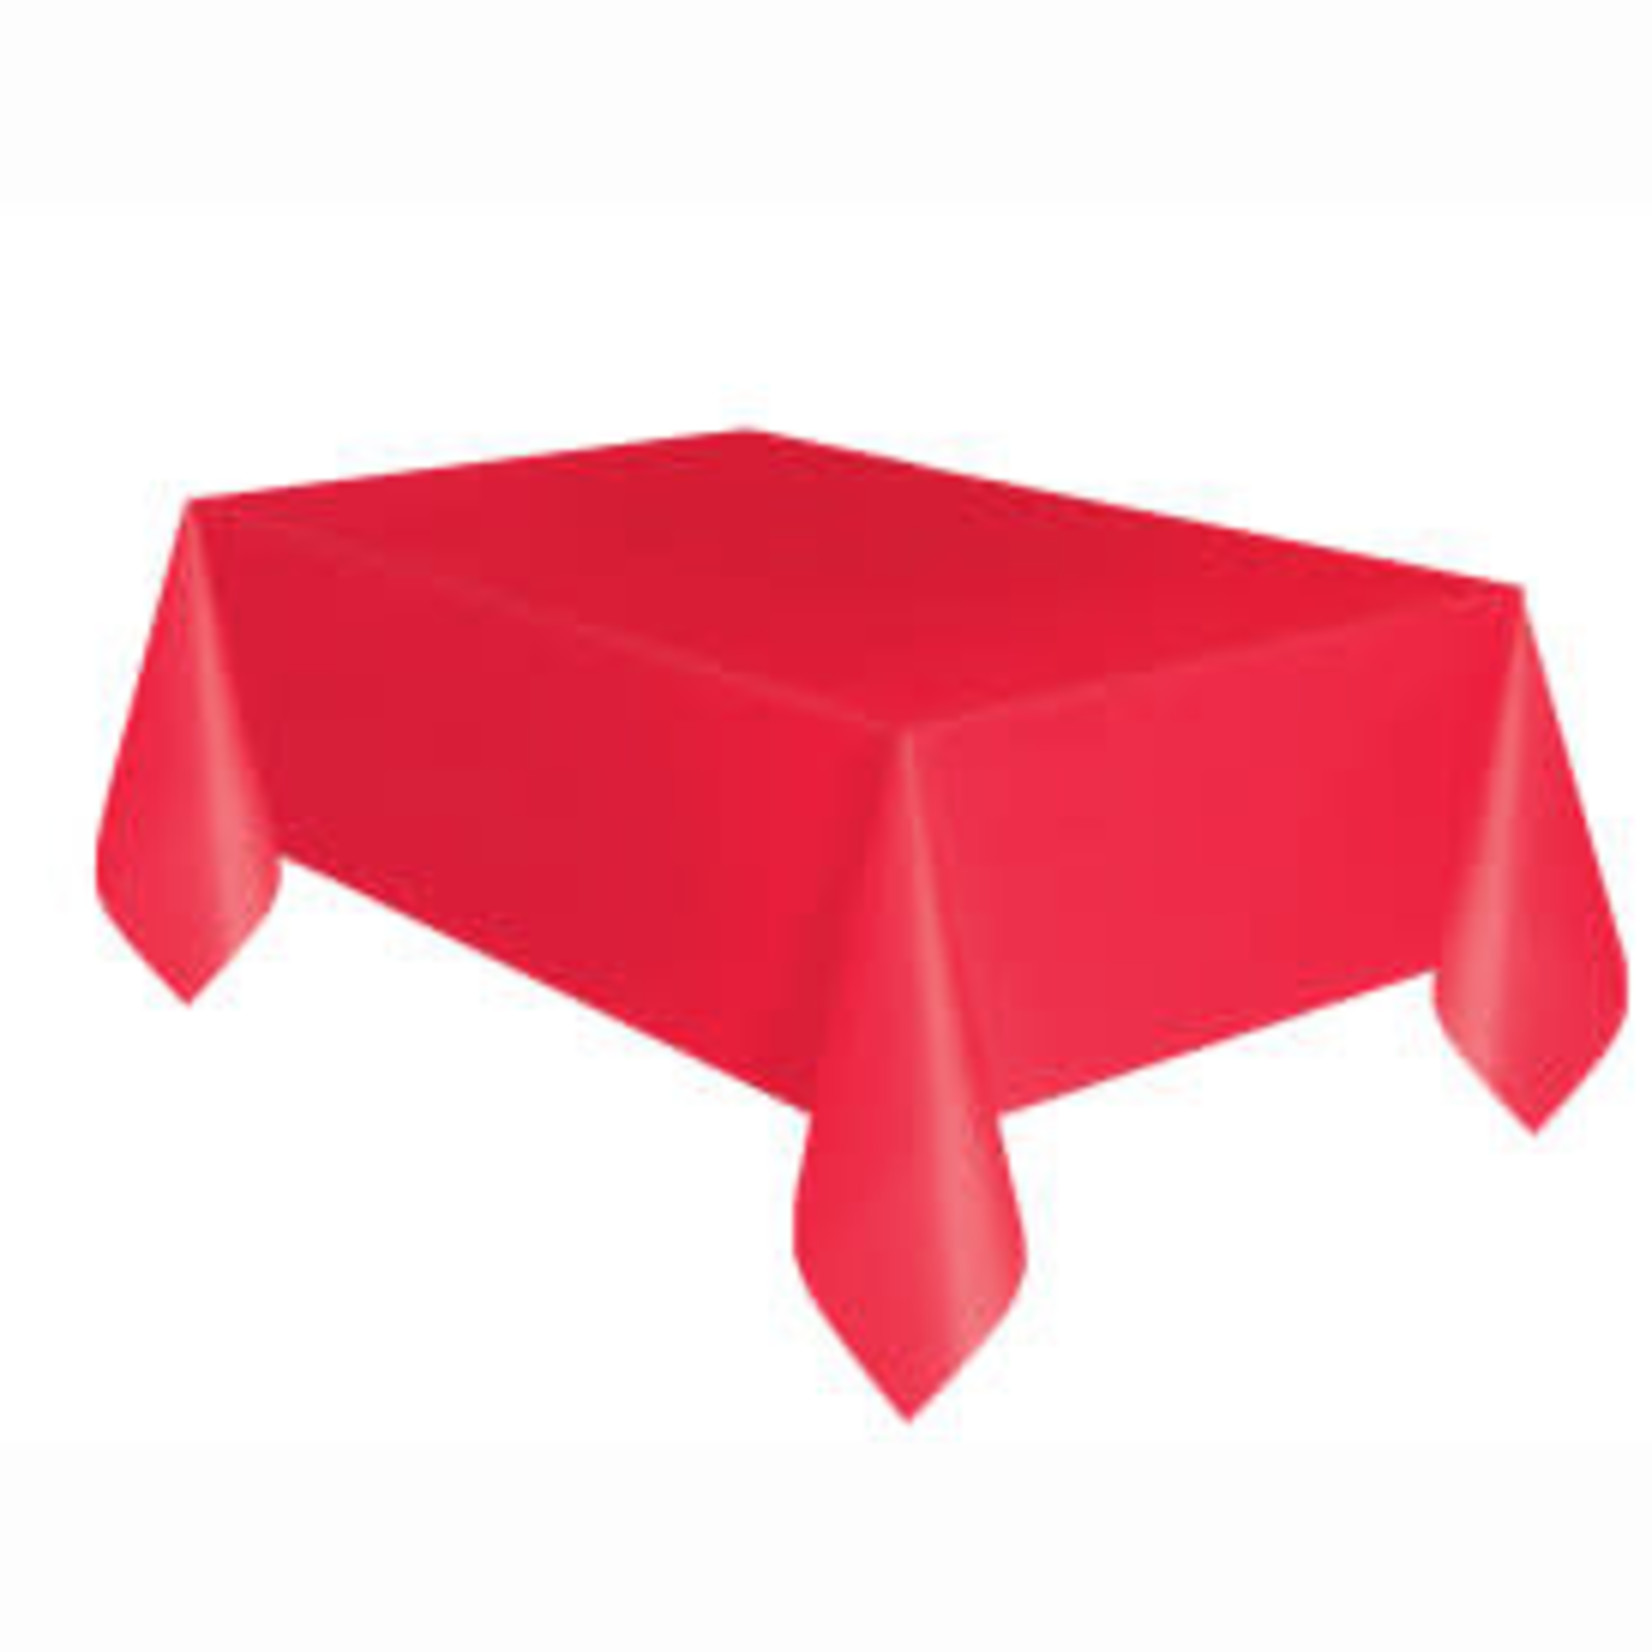 Plastic Tablecover 54""x108"" -Red